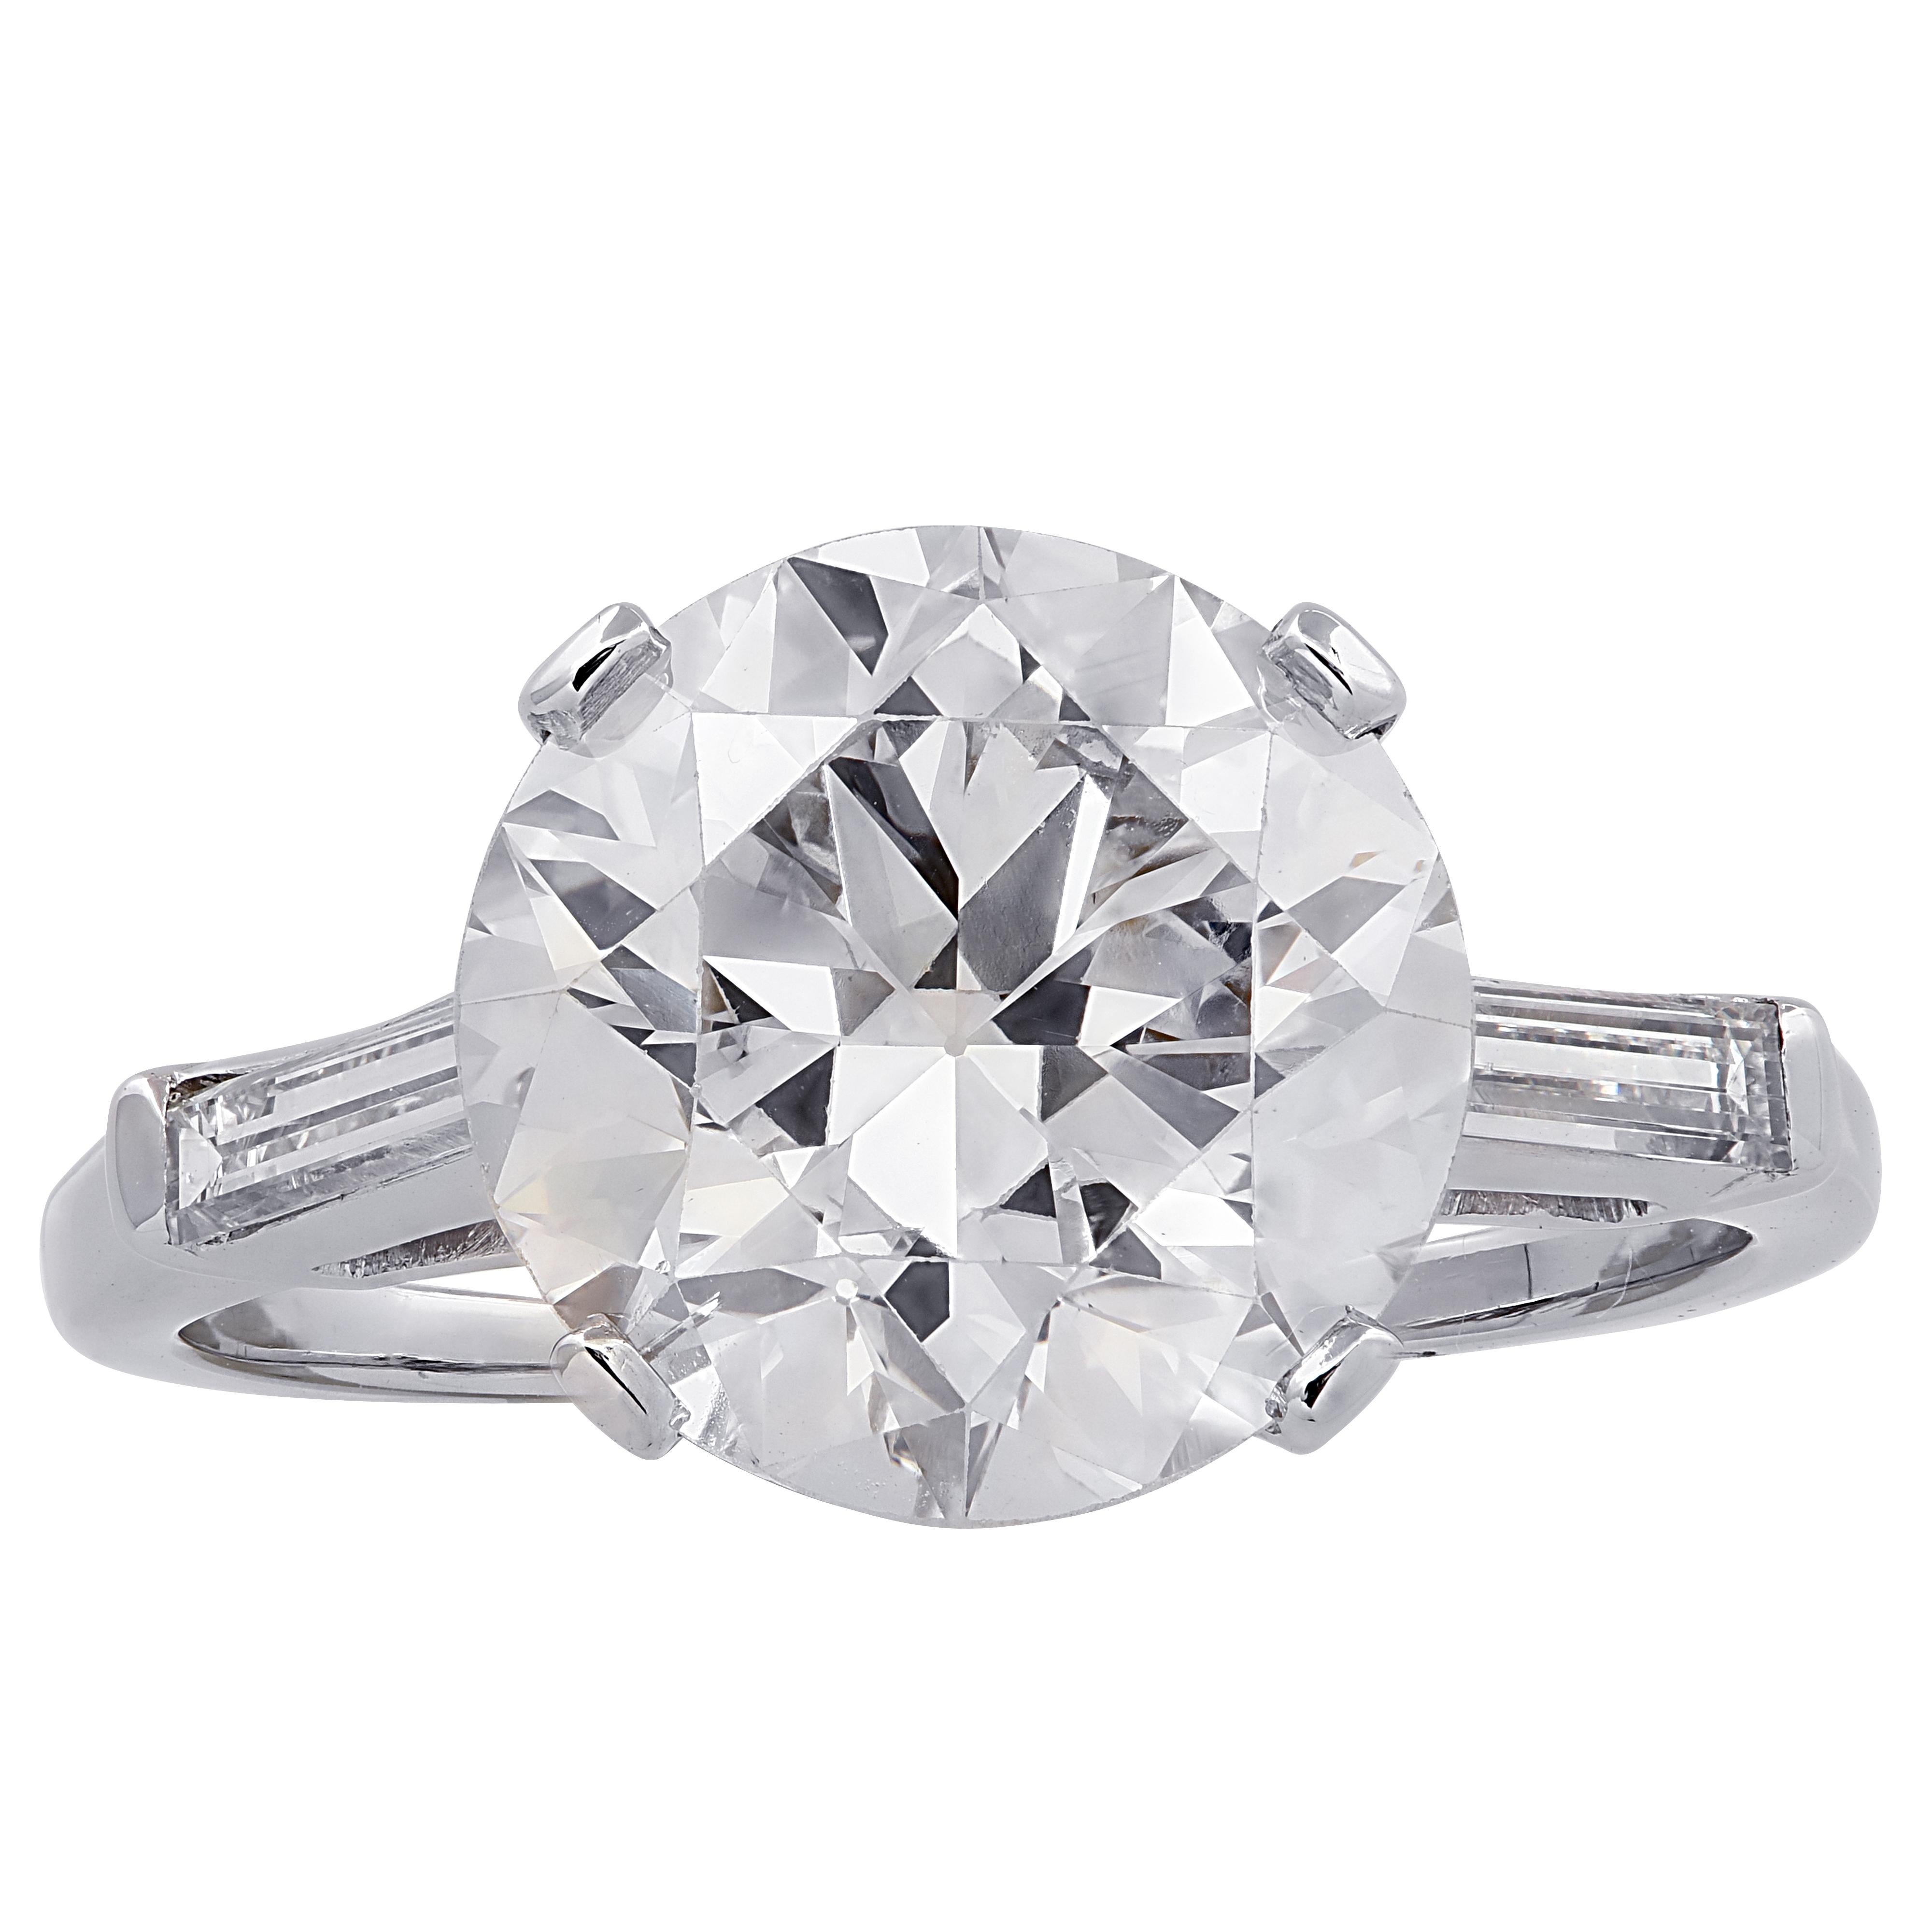 Stunning engagement ring crafted in Platinum, showcasing a spectacular Old European Cut Diamond weighing 4.86 carats, K color, SI clarity, seamlessly set with 2 carefully selected and perfectly matched straight cut baguettes weighing approximately